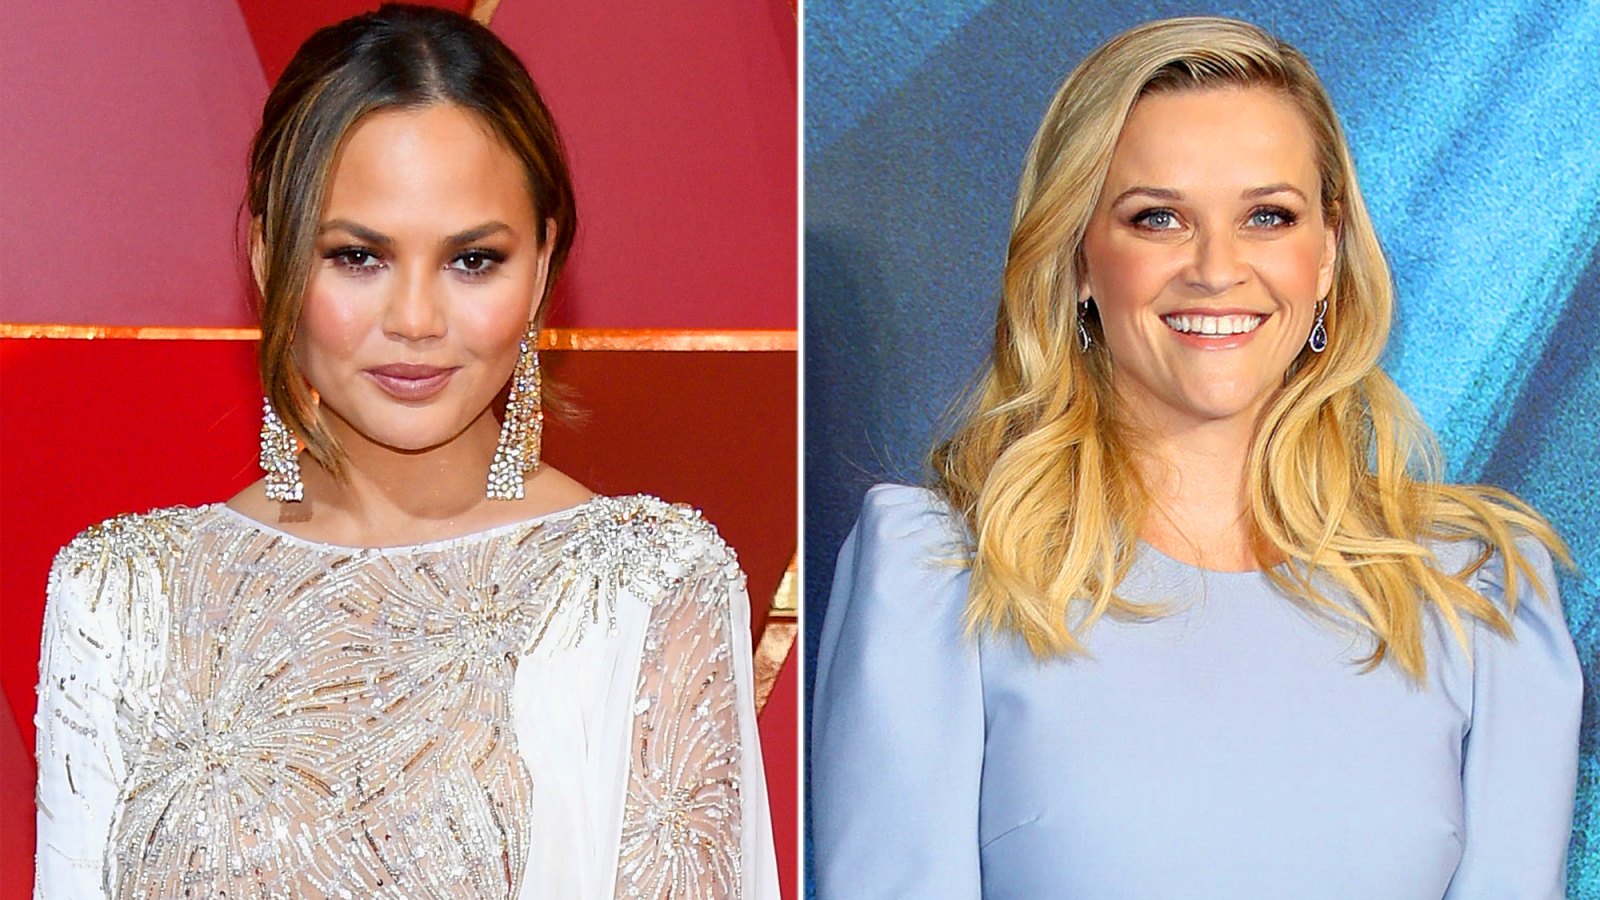 Chrissy Teigen and Reese Witherspoon